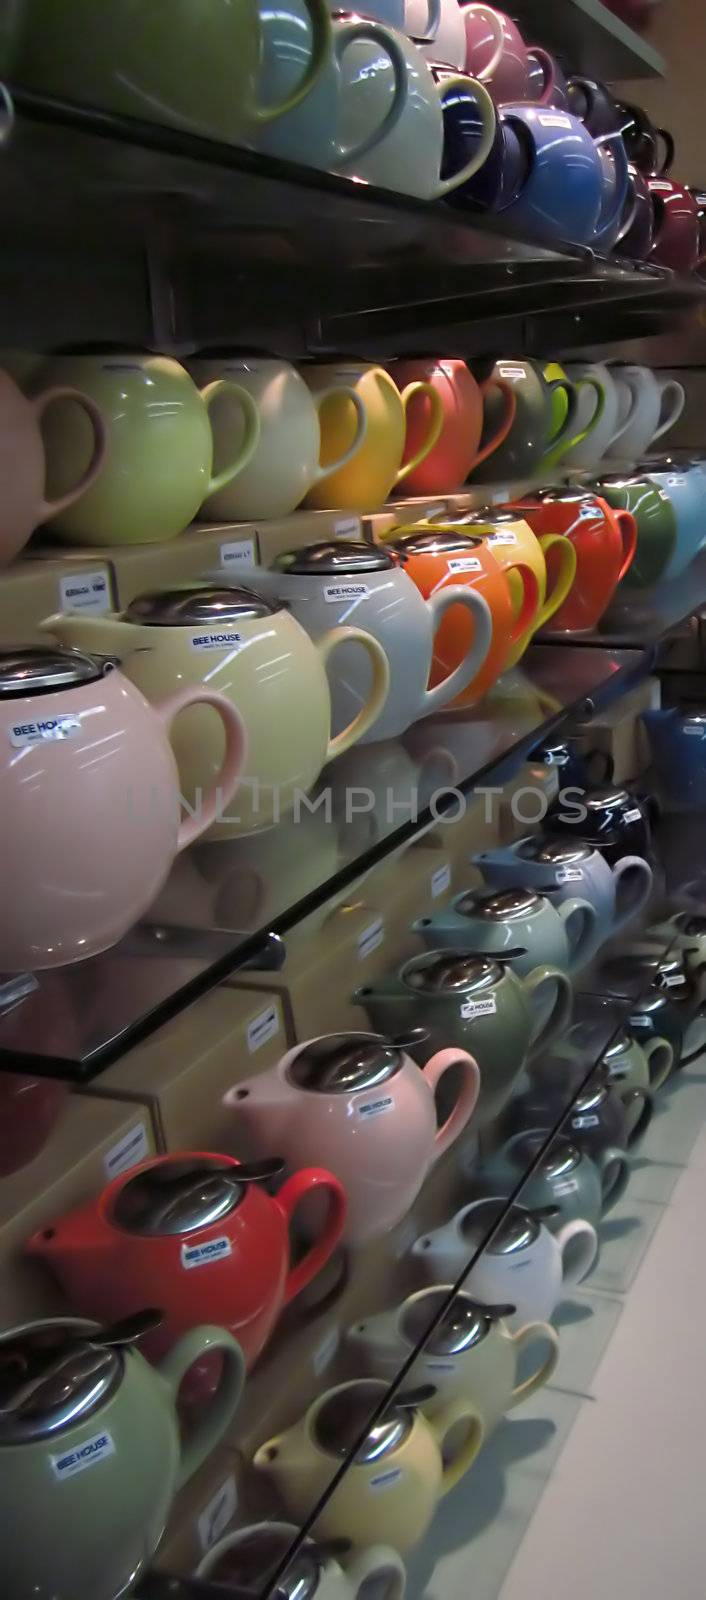 A photograph of various teapots for sale in a grocery store.